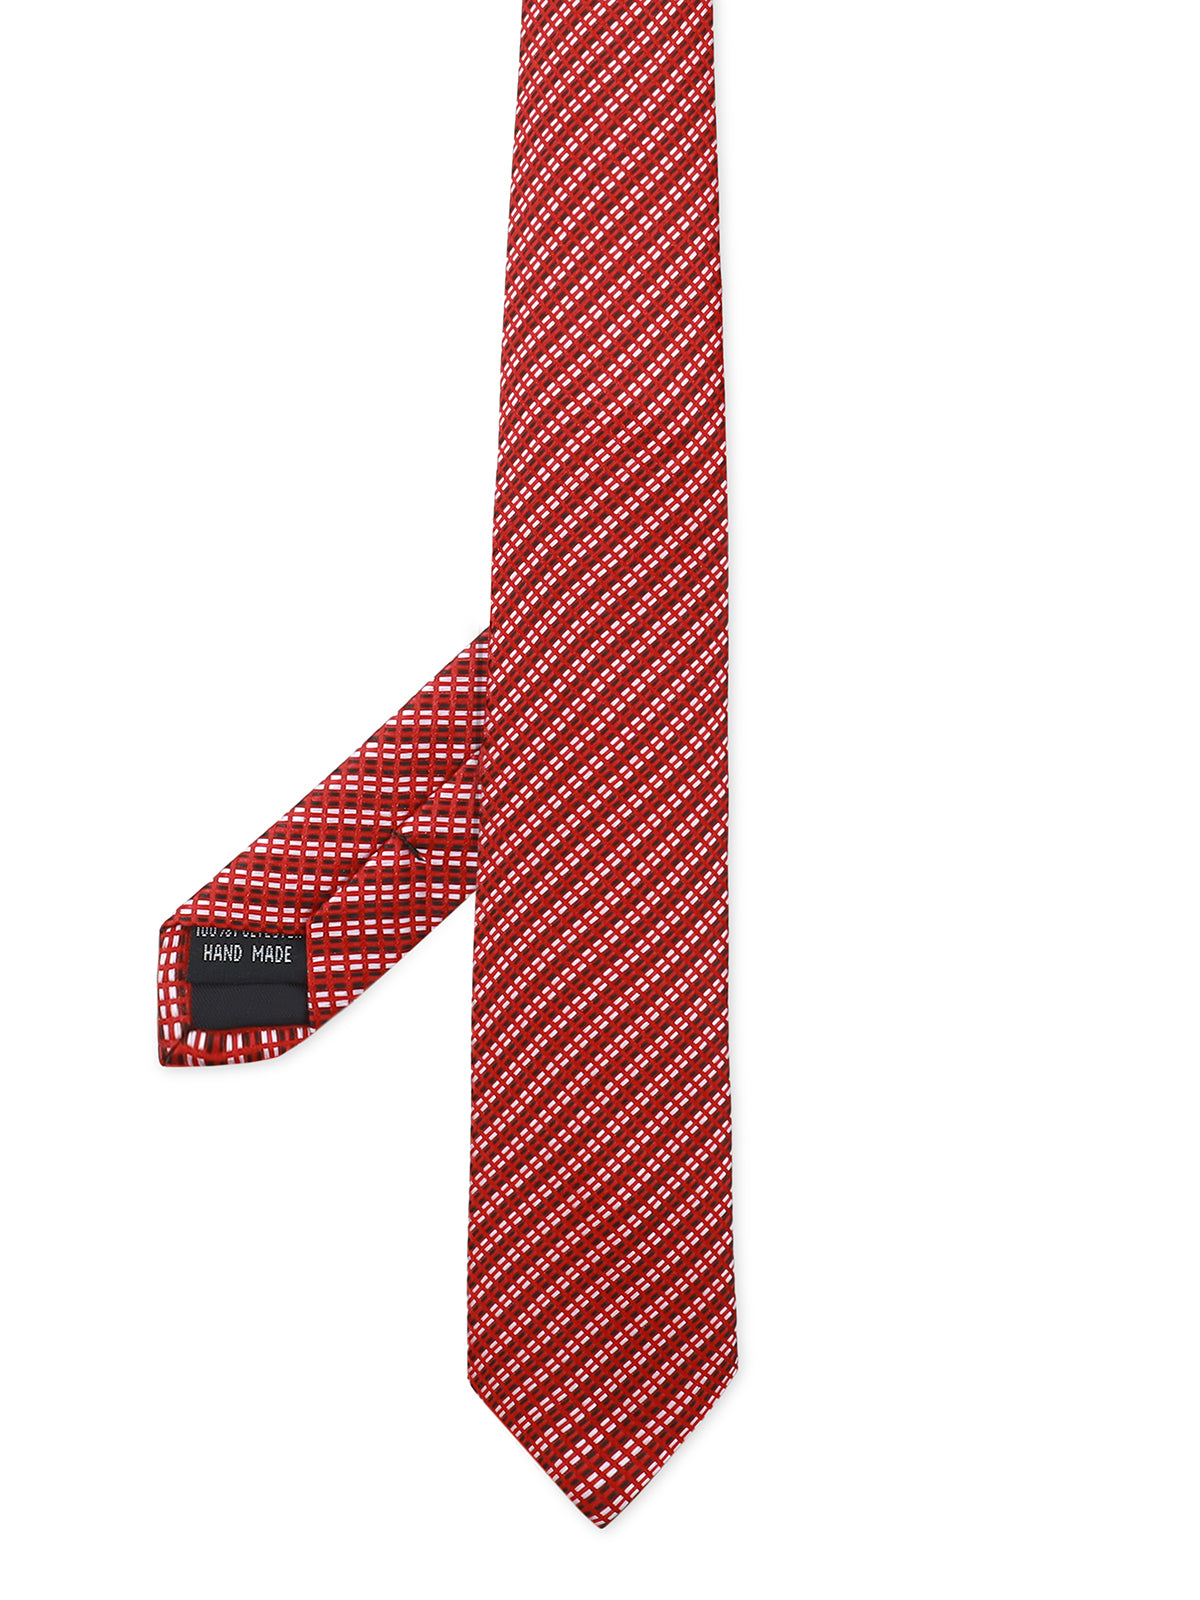 Red Tie - EAMT24-050